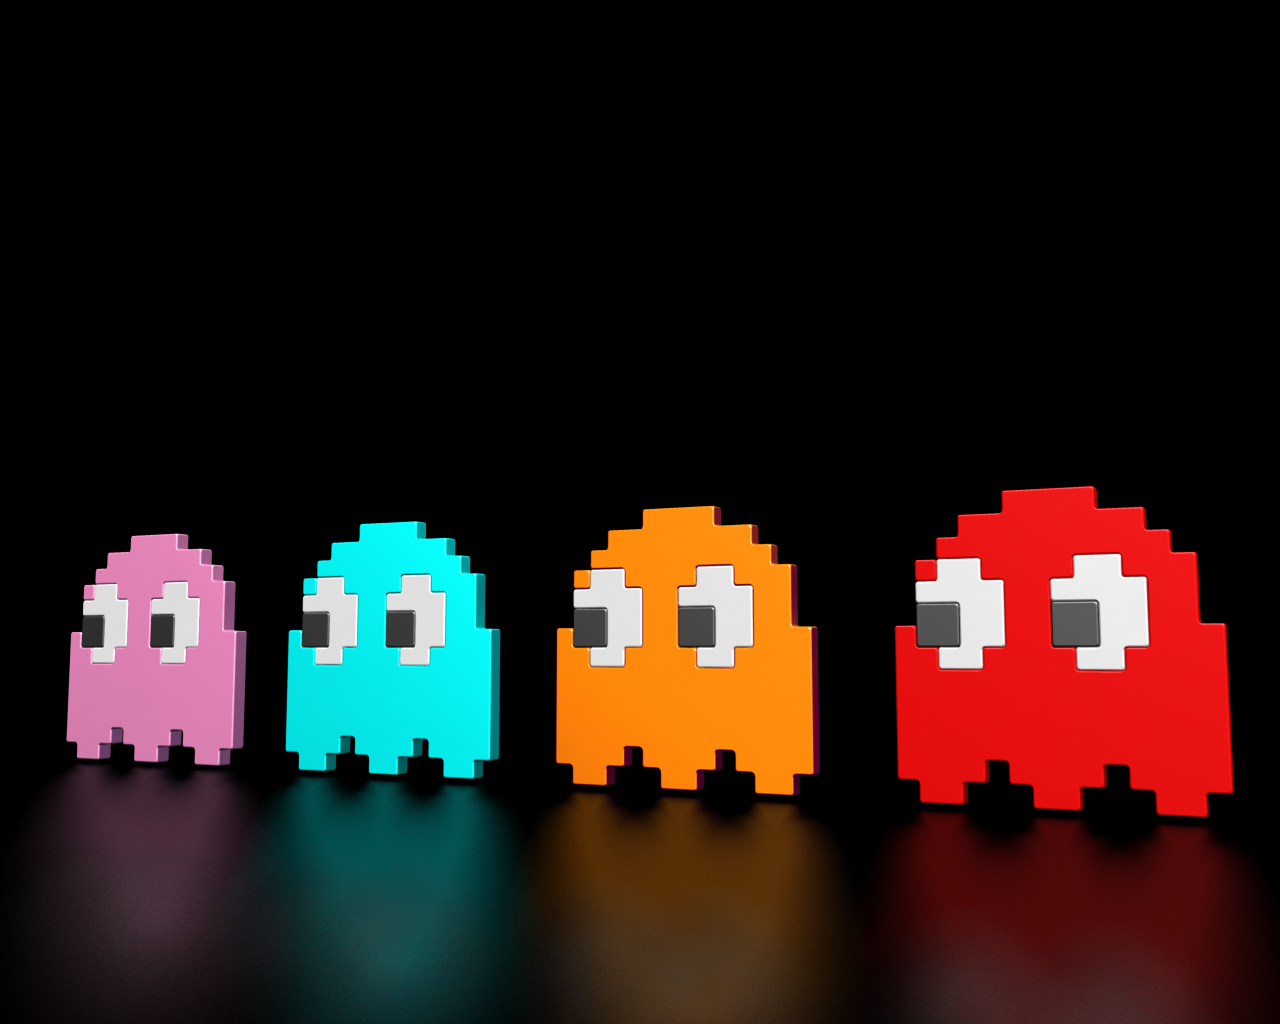 Pacman Reflection Wallpaper Background Classic Game Arcade Img Image